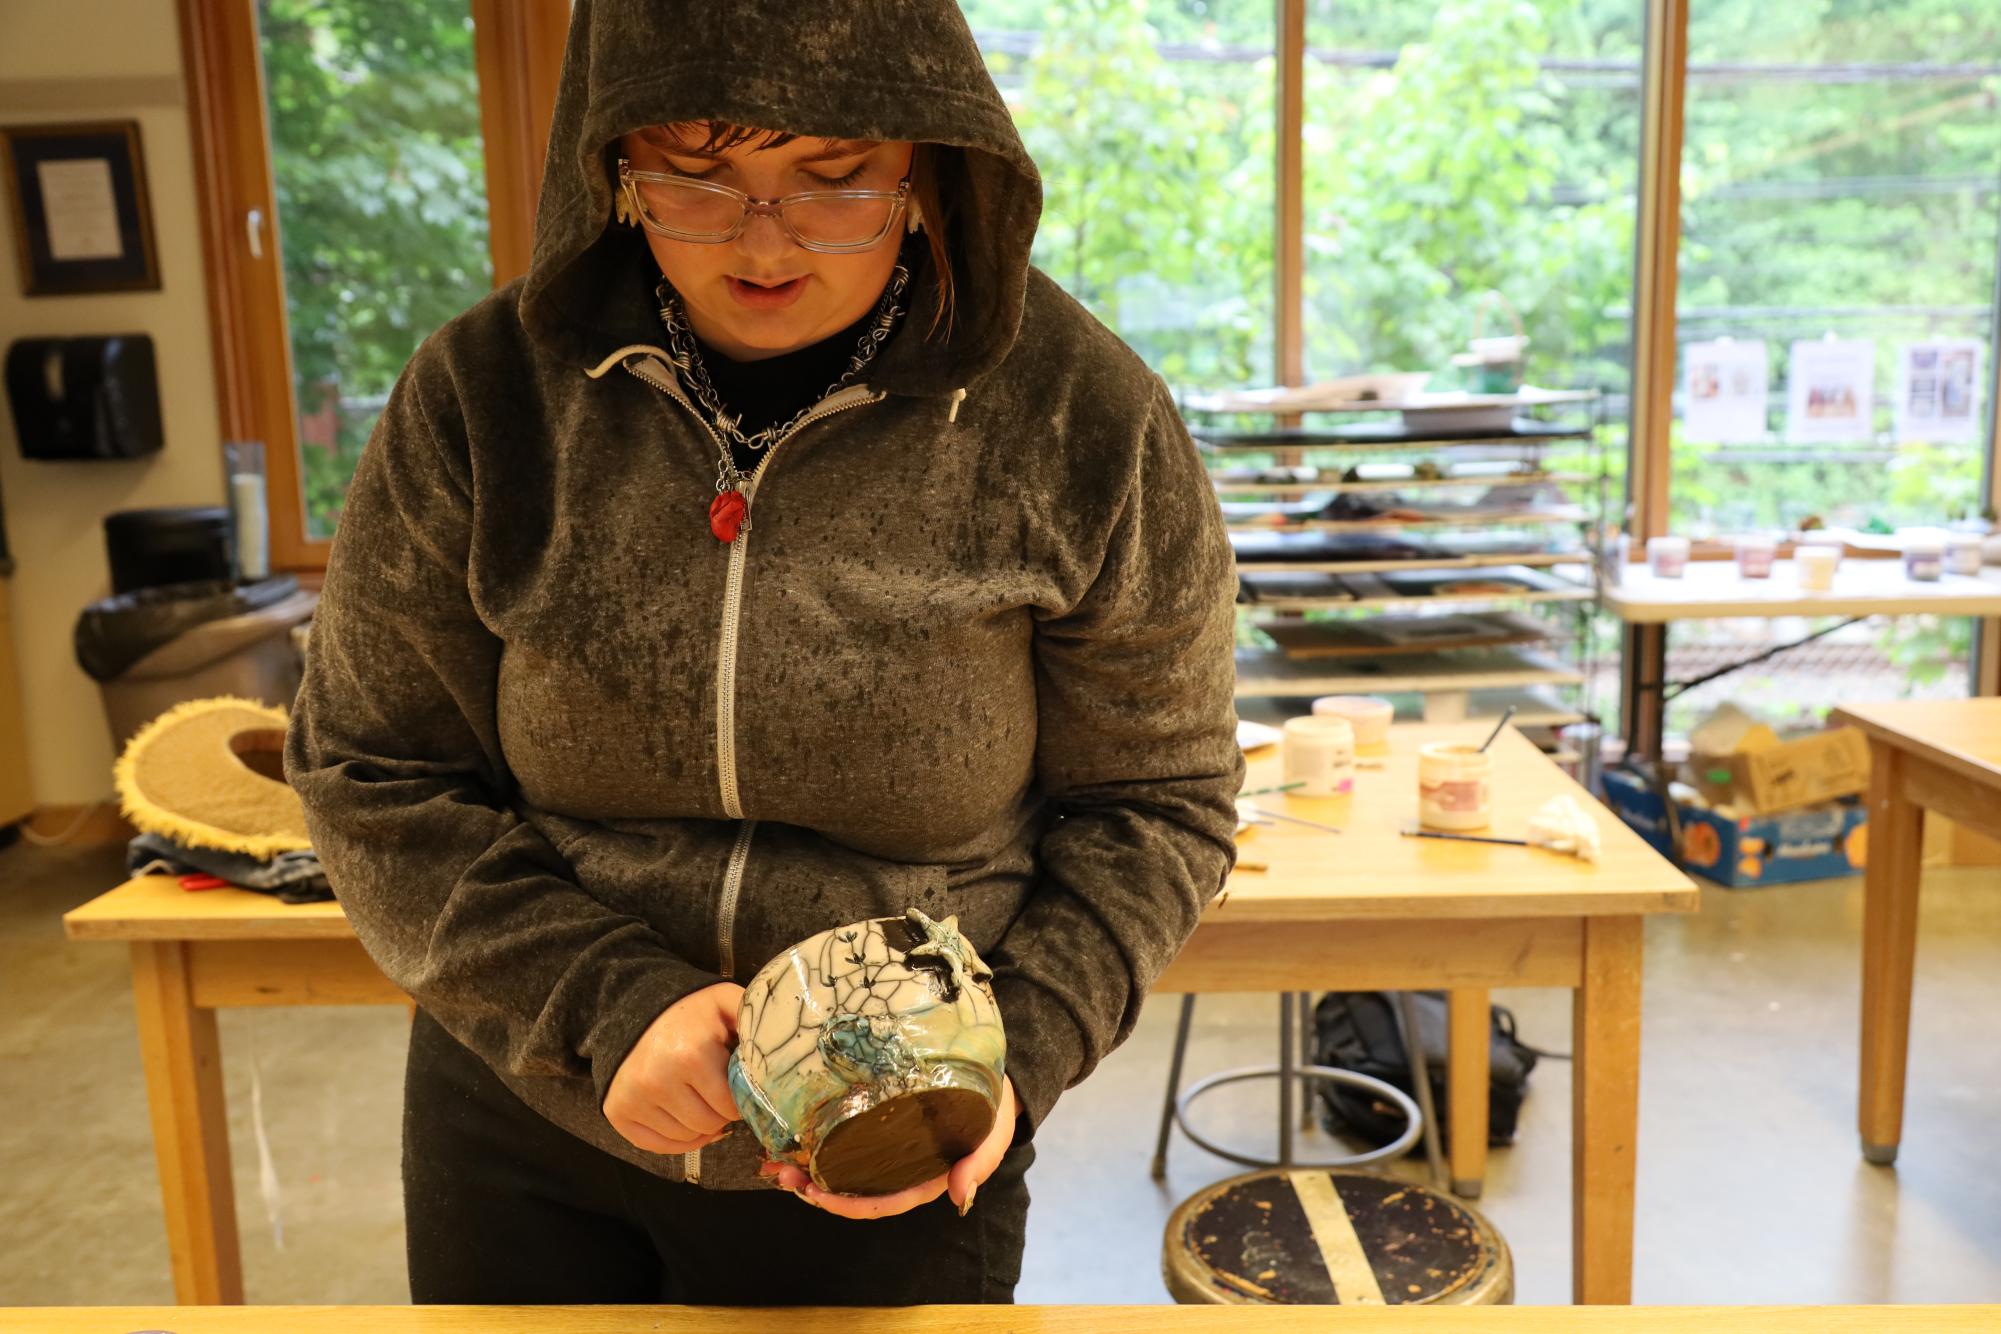 This+hands-on+experience+allowed+students+to+appreciate+the+beauty+and+uniqueness+of+Raku+pottery.